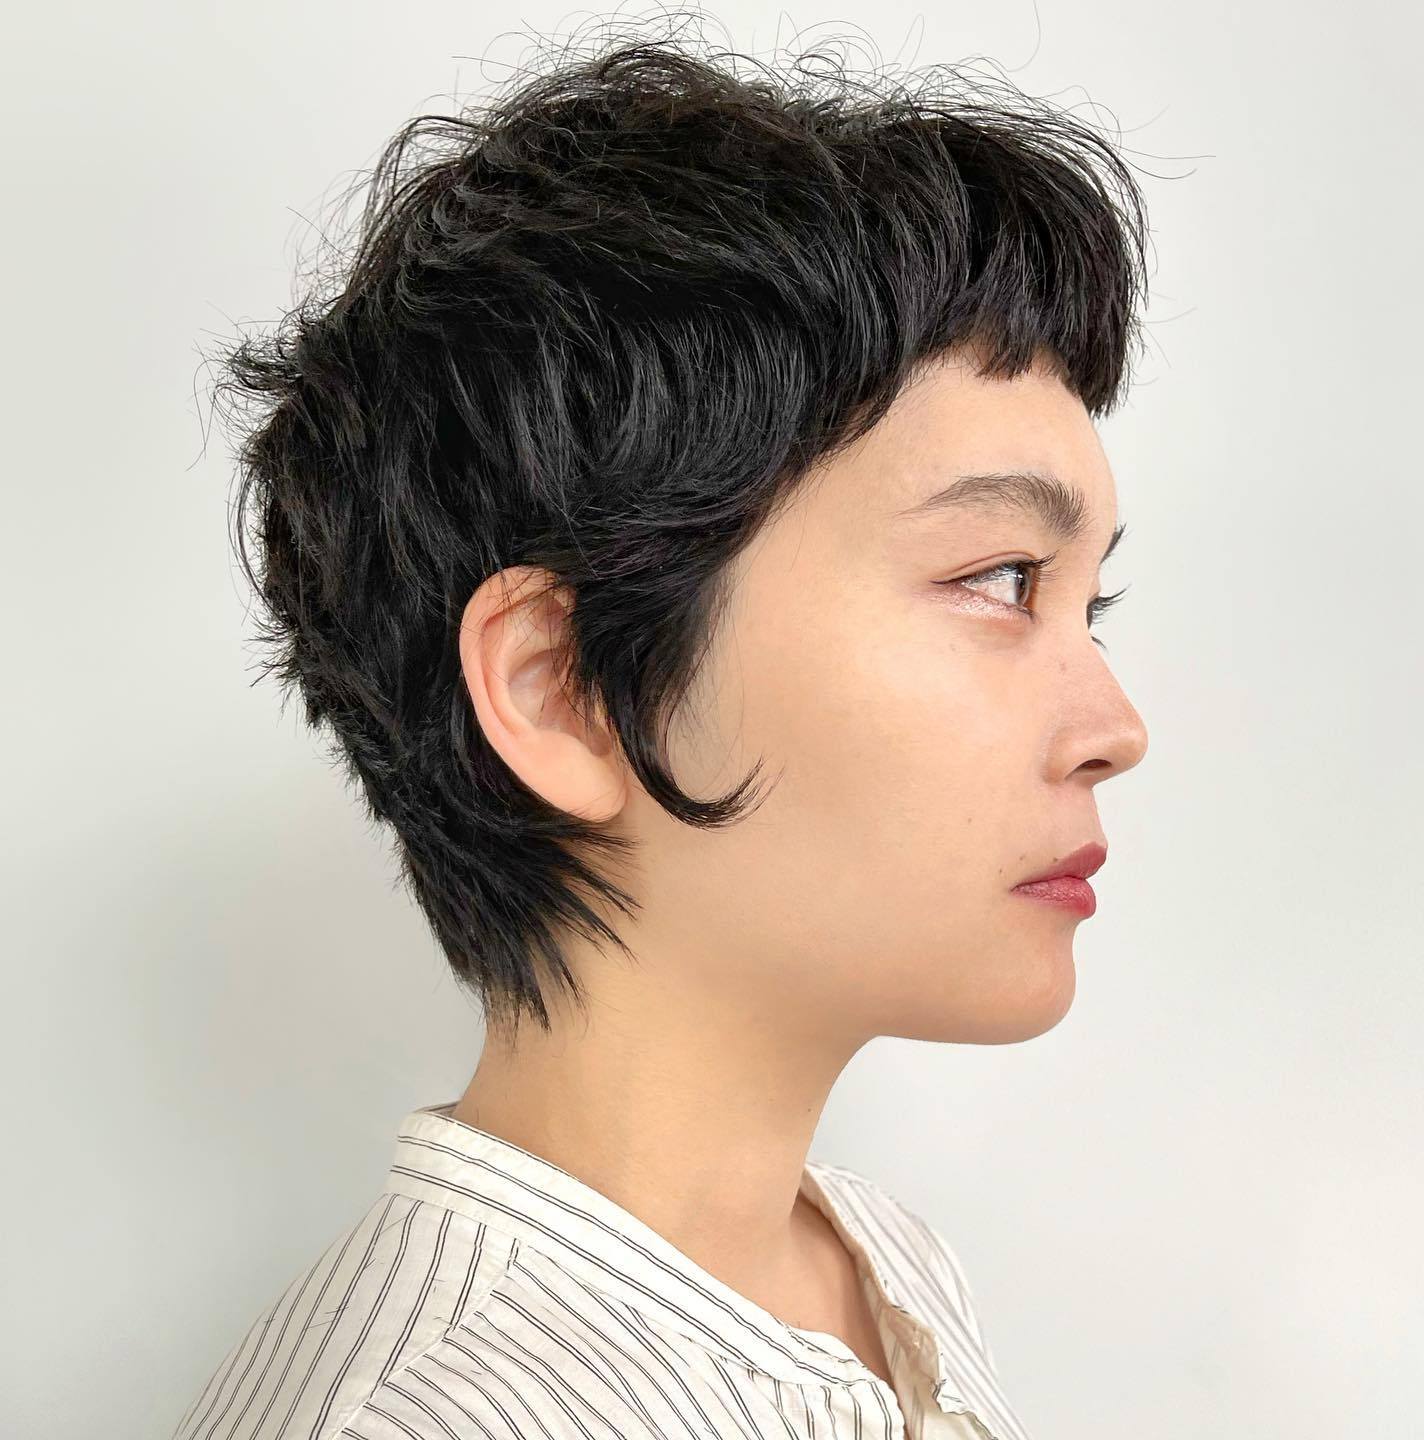 Long Pixie Haircut with Textured Layers